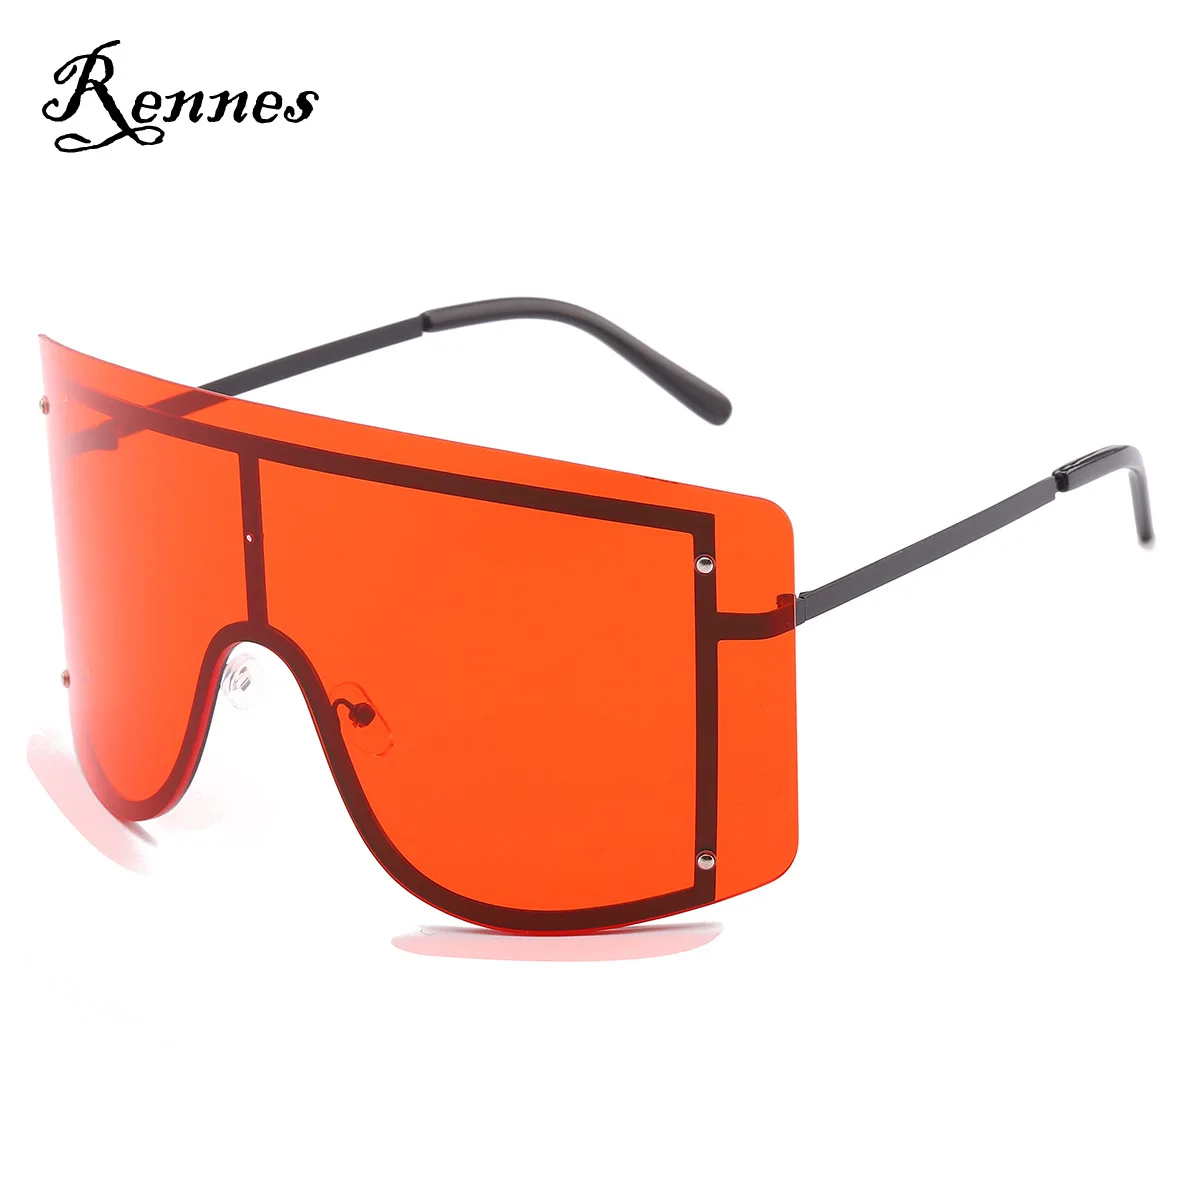 

RENNES [RTS] One Piece Oversized Glasses Metal Frame Rimless Glasses Fashion Colorful Sunglasses CE, Custom colors